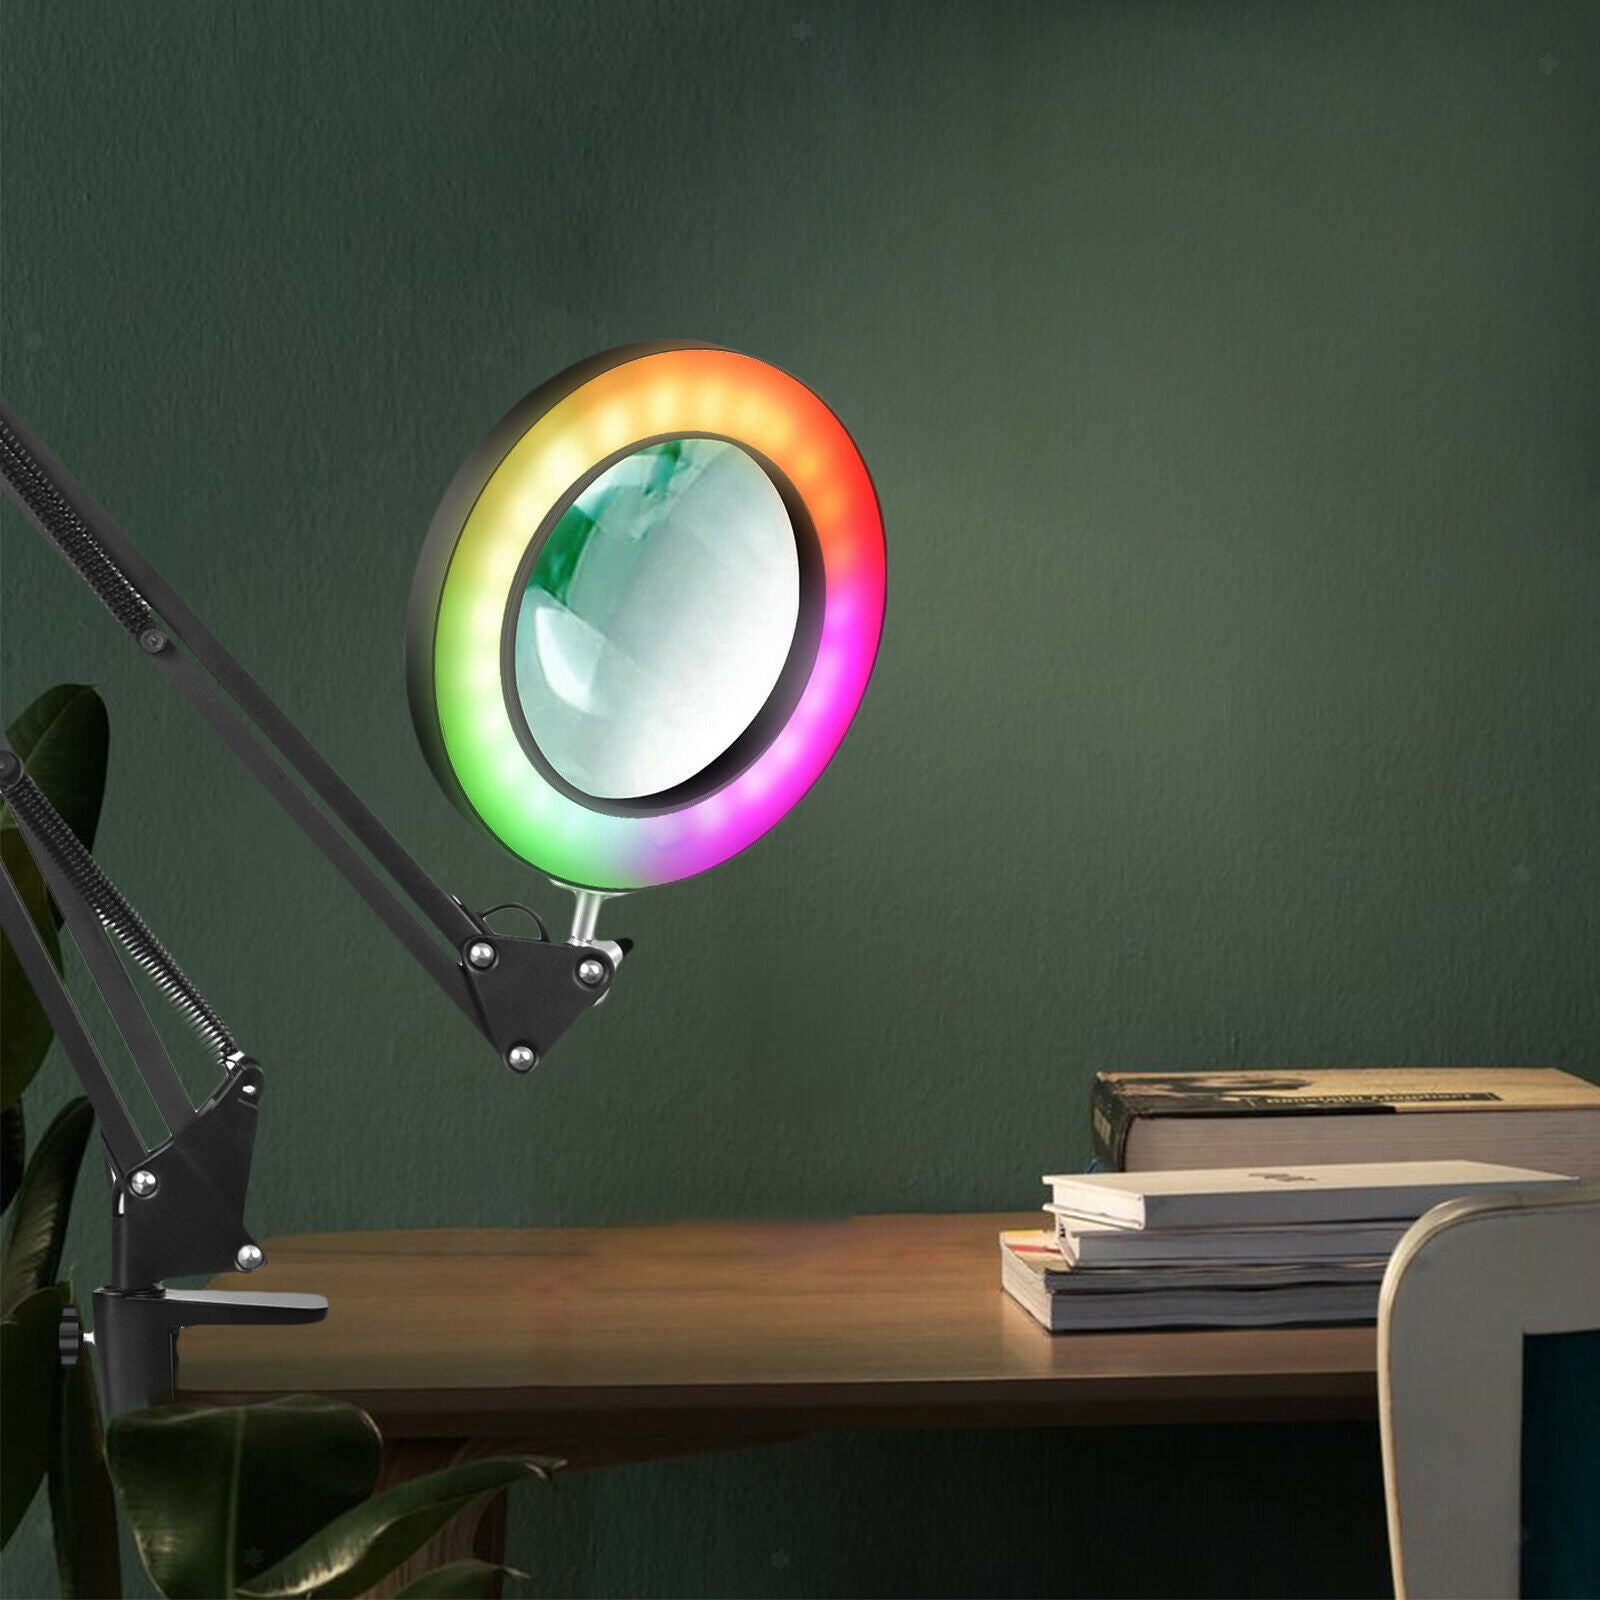 5x Magnifying Glass with Light USB Powered 3 Colors Illuminated for Reading